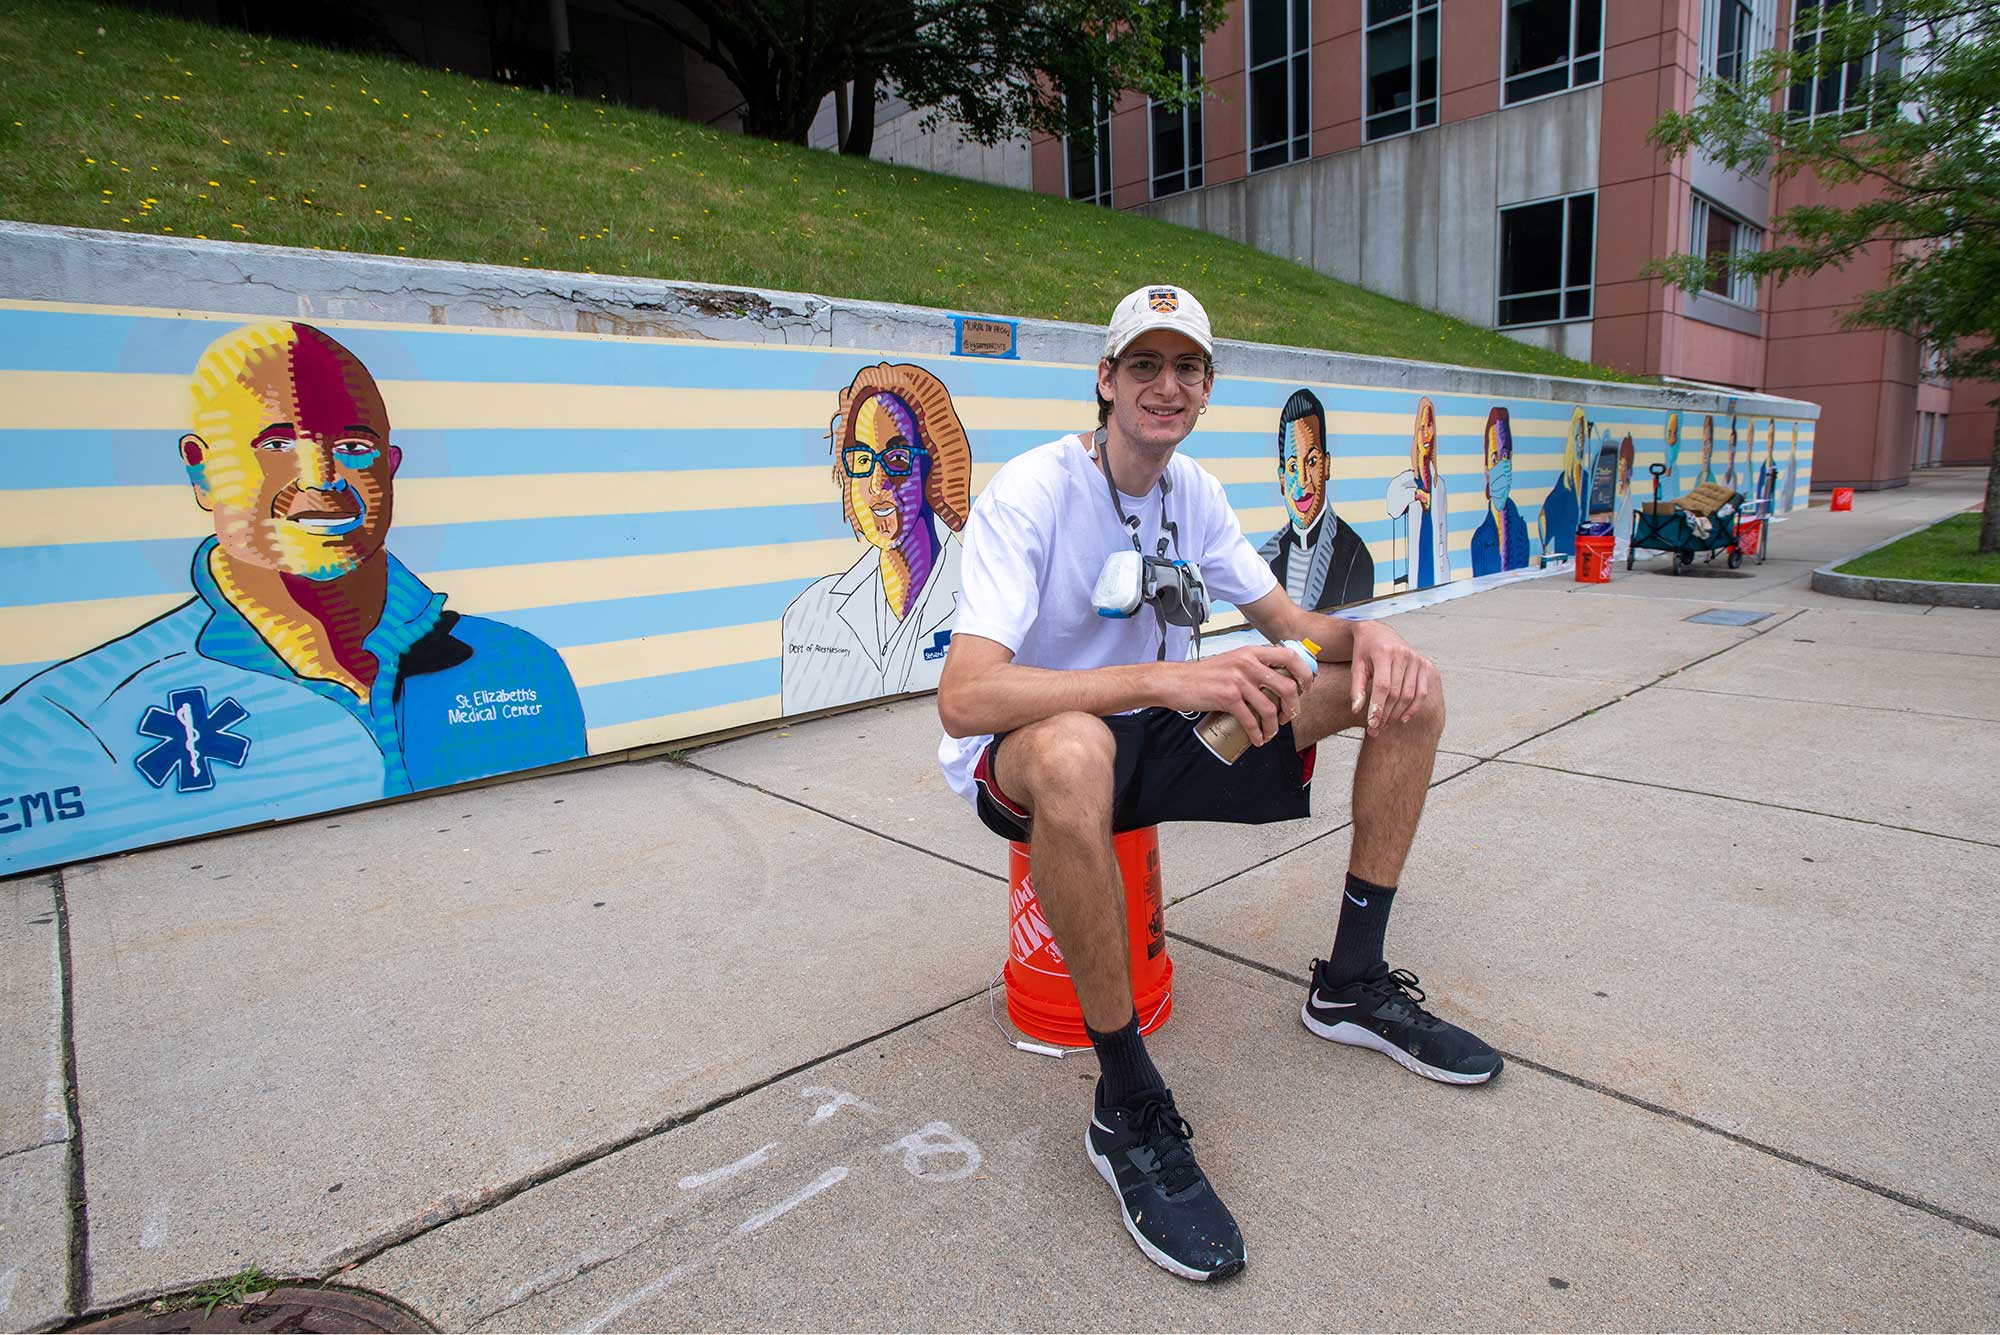 Photo of Sam Weinberger sitting on top of an orange home depot bucket, wearing white hat and t-shirt and shorts, in front of his recently painted mural at at St. Elizabeth Medical Center, which features colorful portraits of staff.